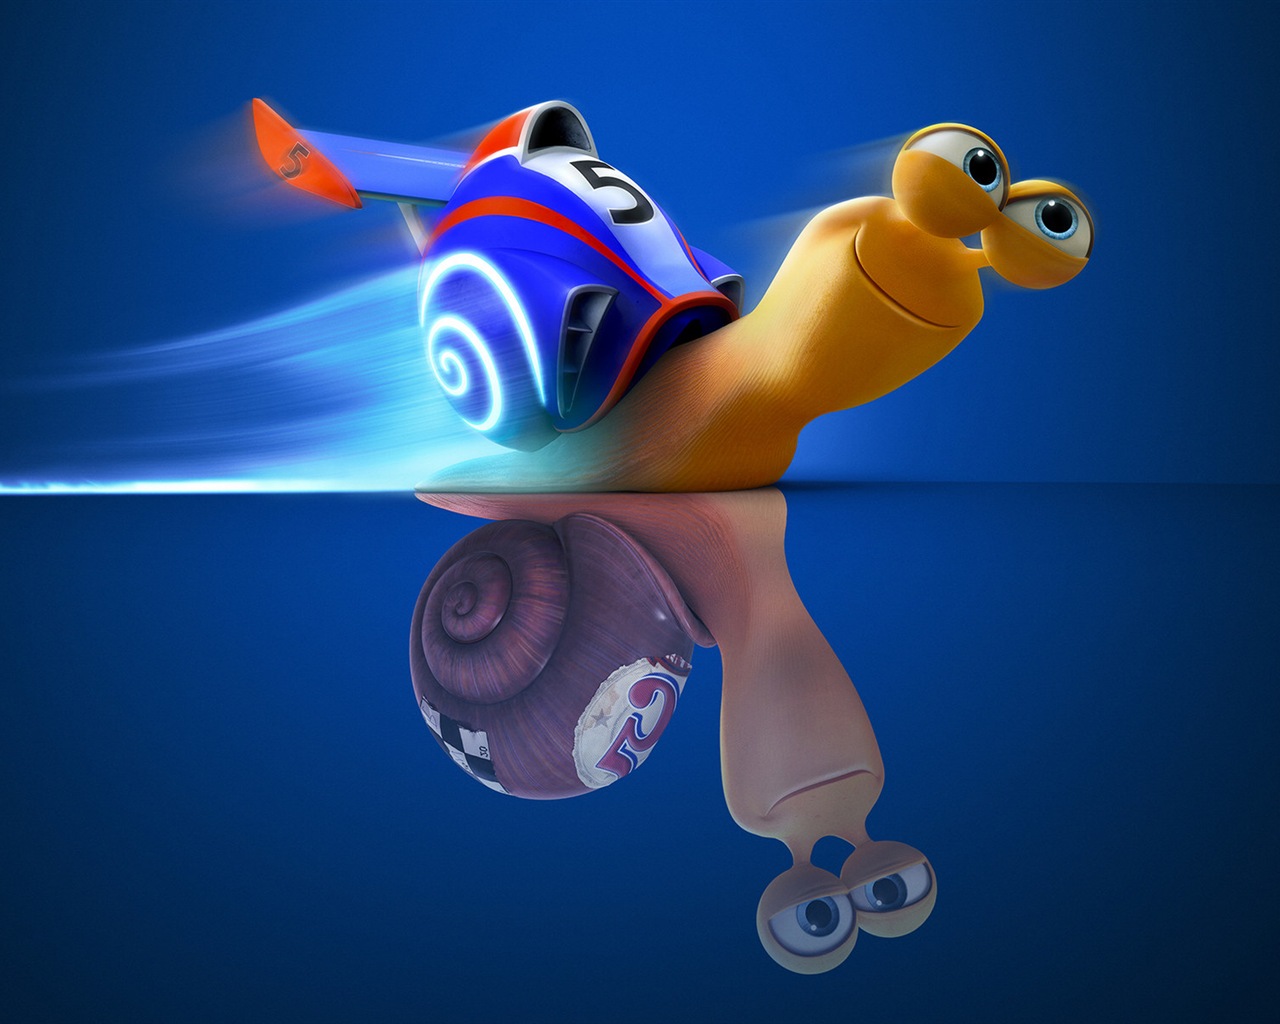 Turbo 3D movie HD wallpapers #4 - 1280x1024